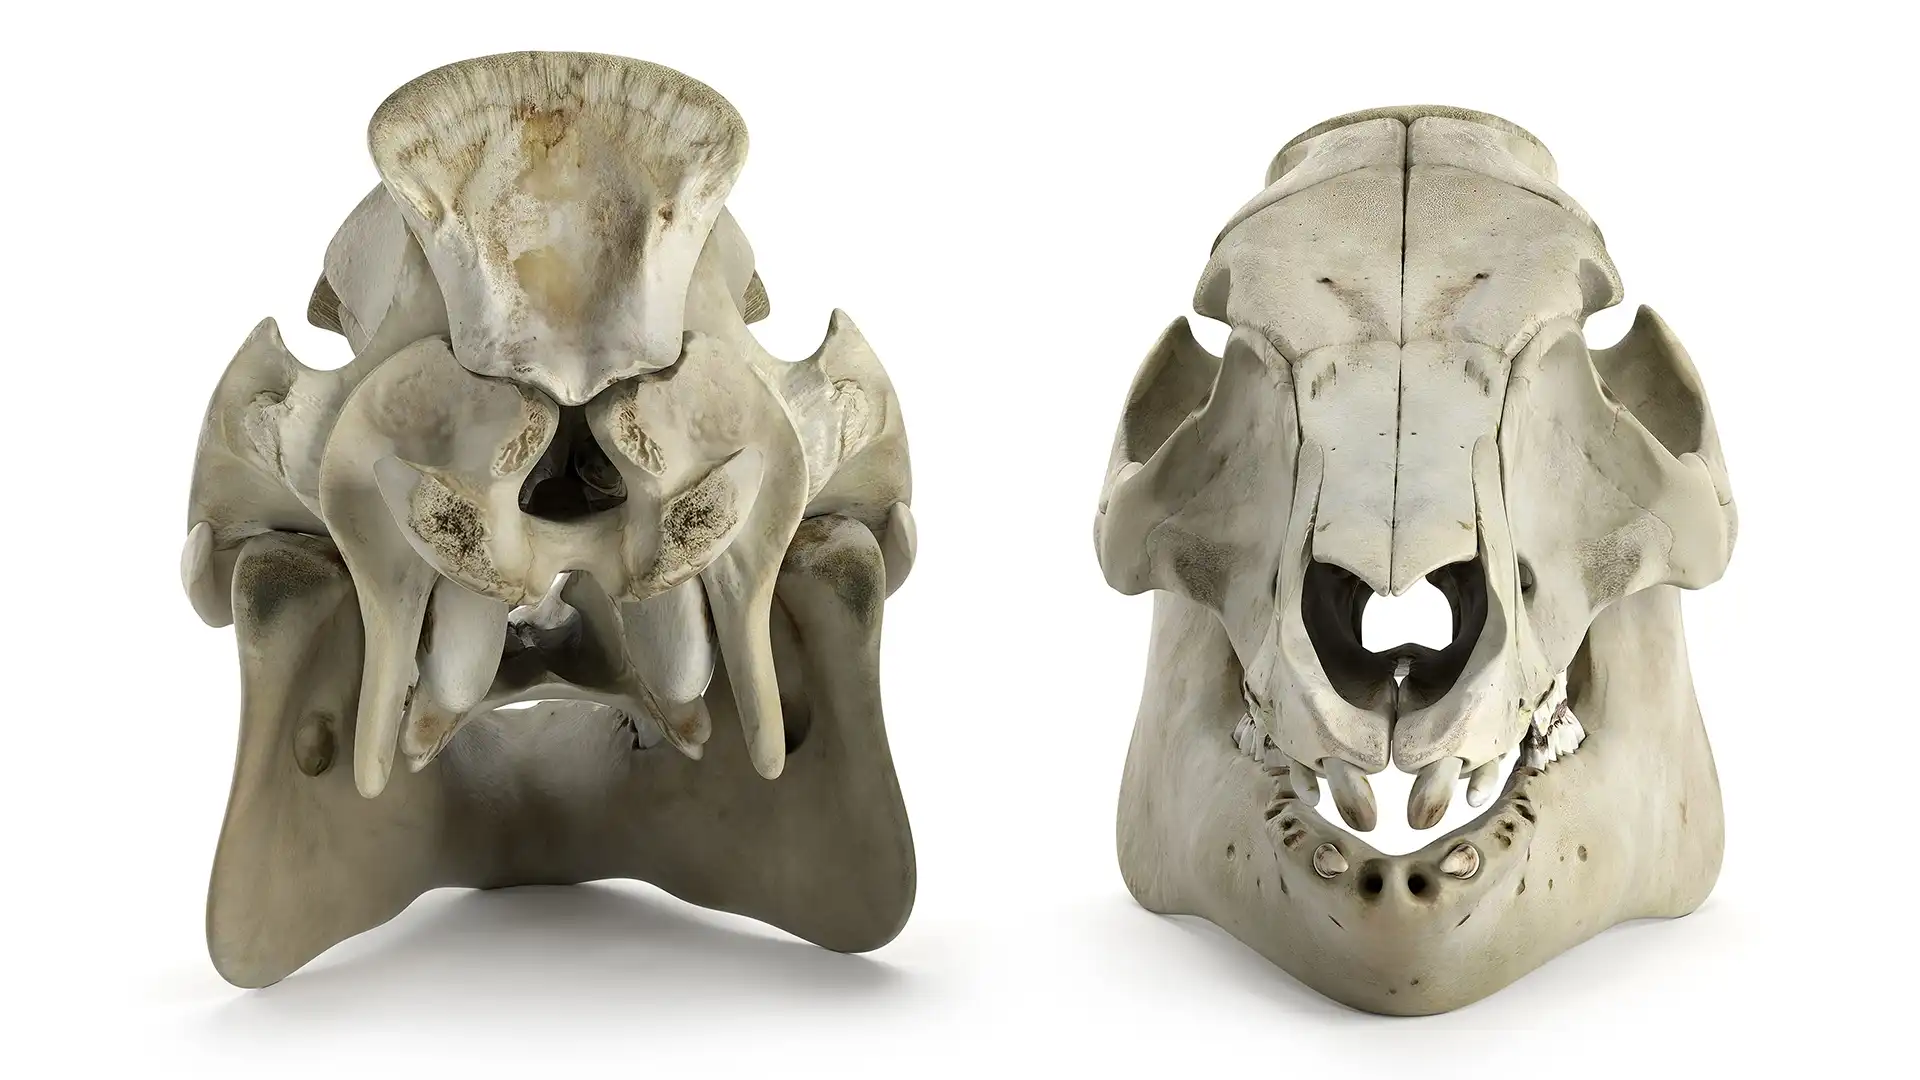 Photorealistic scientific 3D rendering of anterior and posterior sides of animal skull, made using a professional scanned anatomical 3D model of a pig's skull. Front and back views.